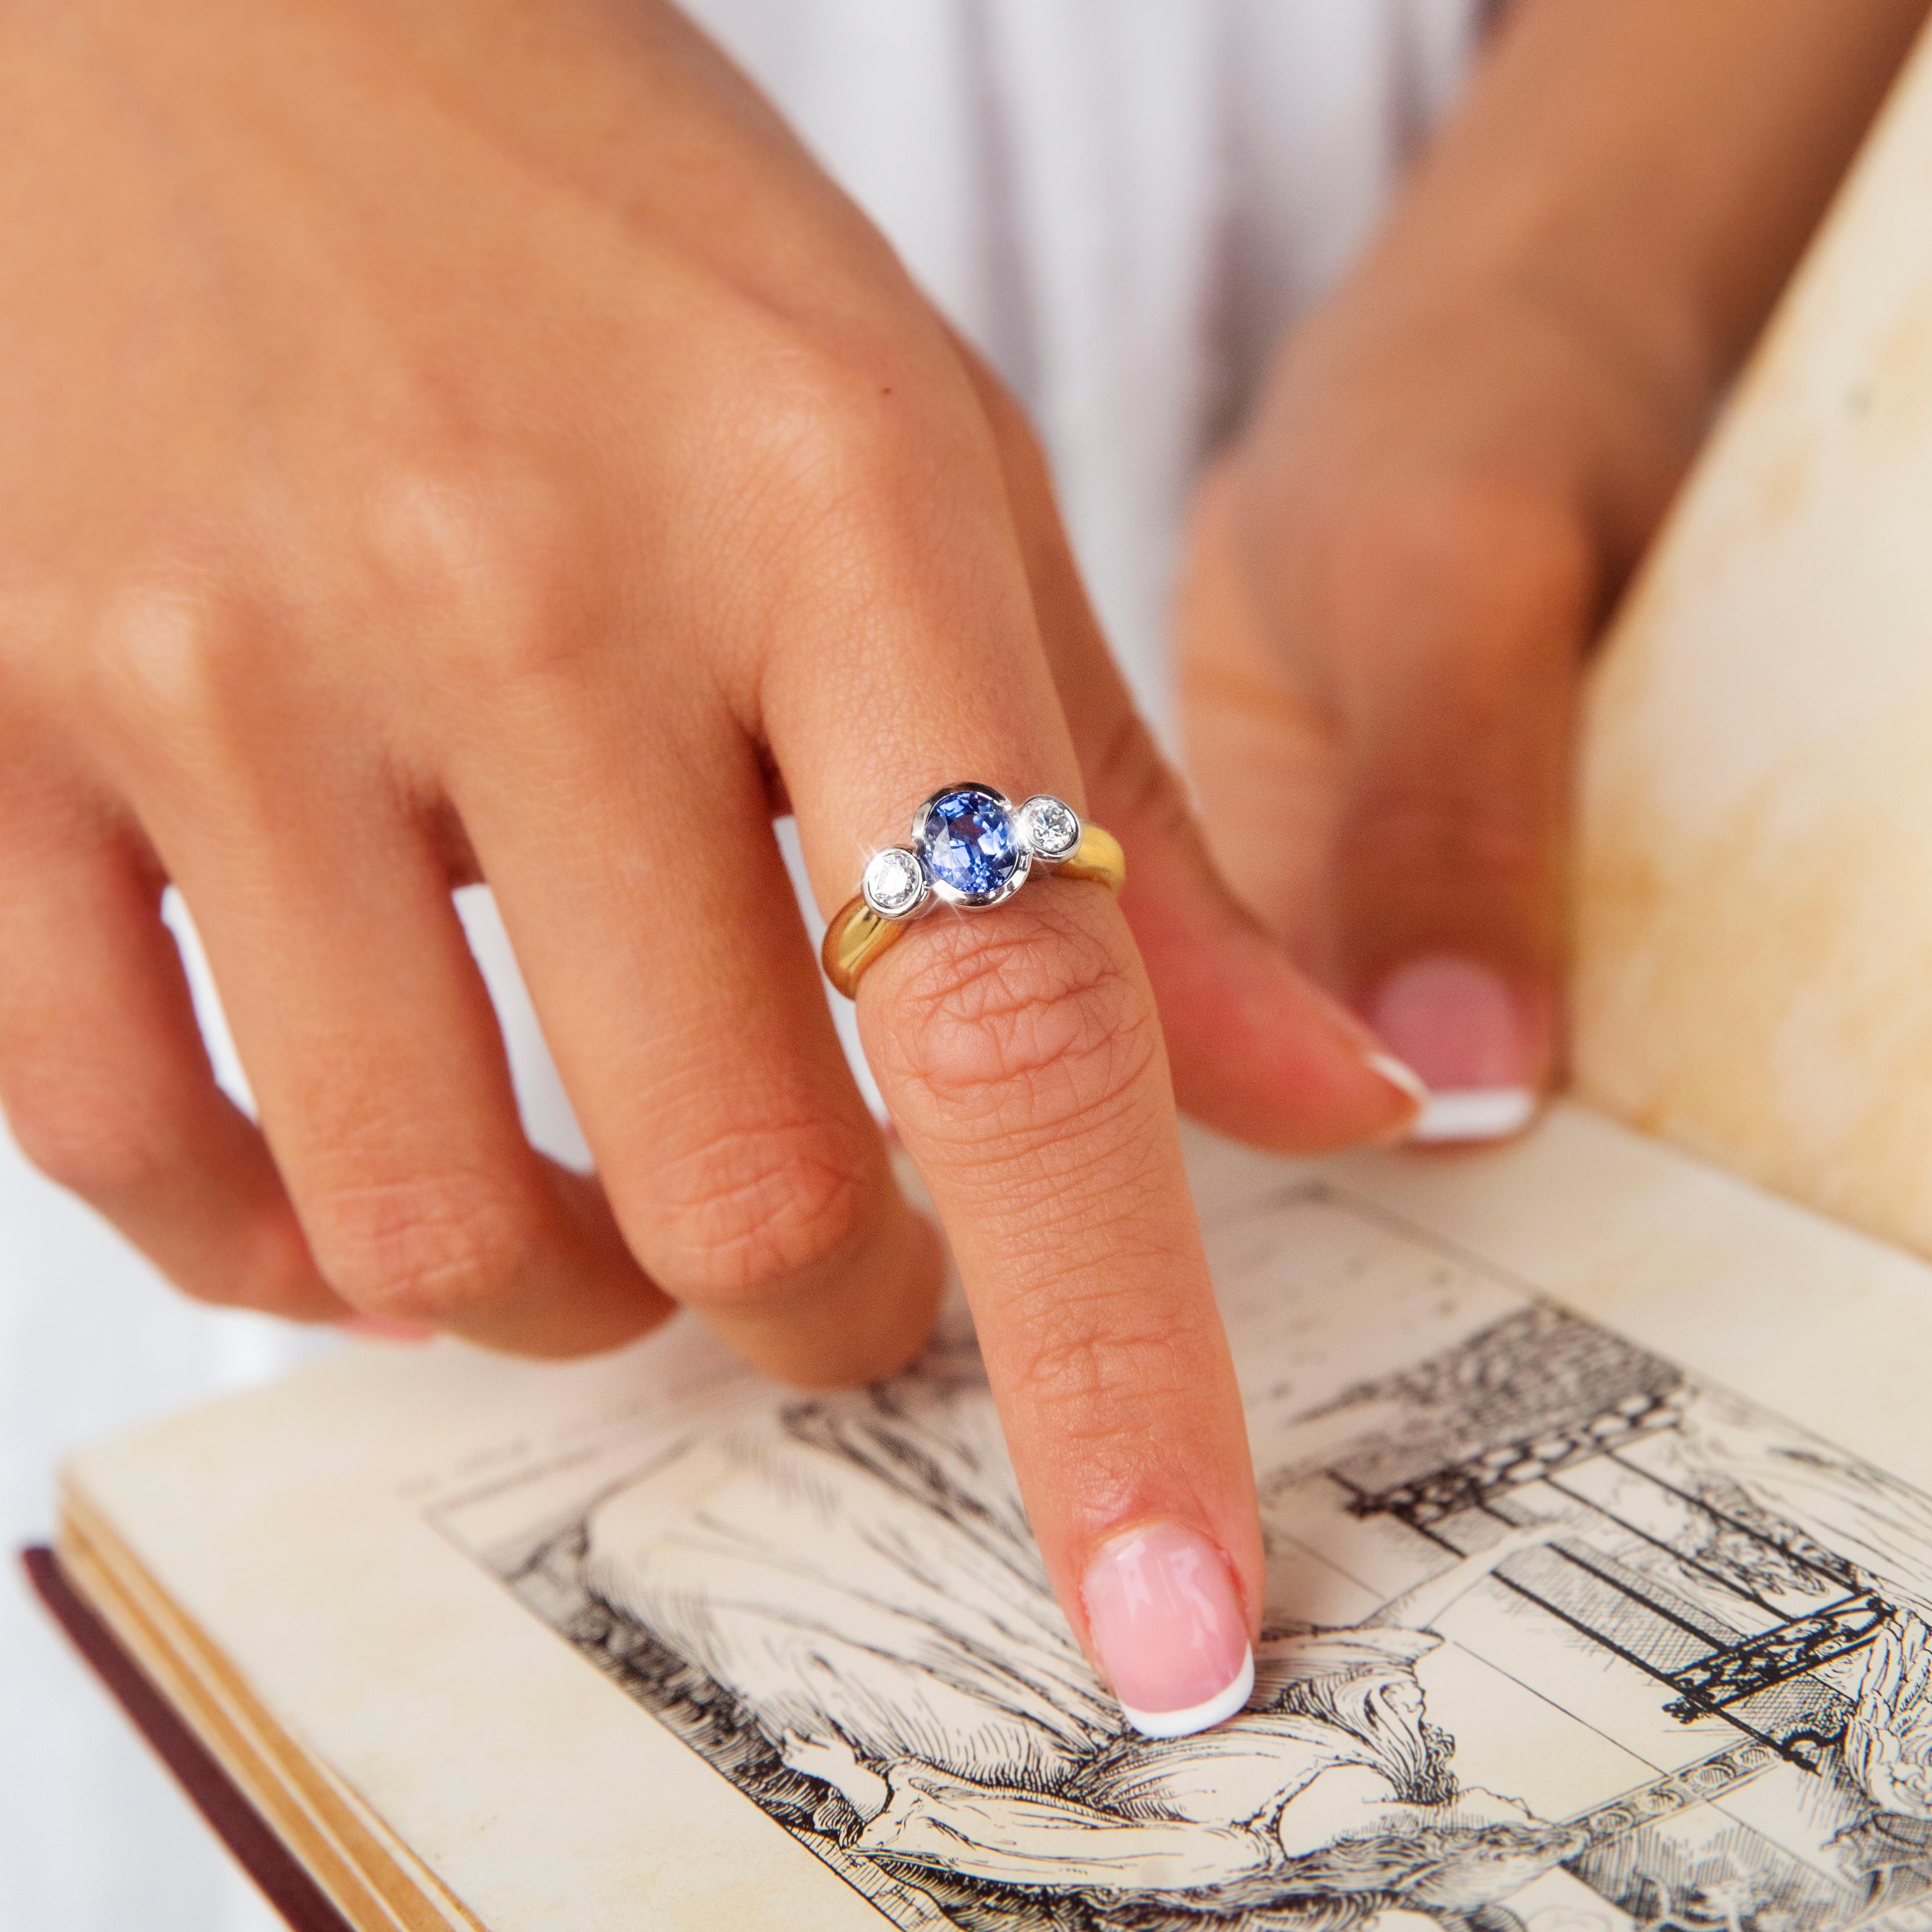 Forged in shimmering 18 carat gold, this delightful vintage 1990s ring features a white gold bezel setting holding one gorgeous light blue Ceylon type sapphire flanked by a duo of shimmering round brilliant cut diamonds atop a high polish yellow